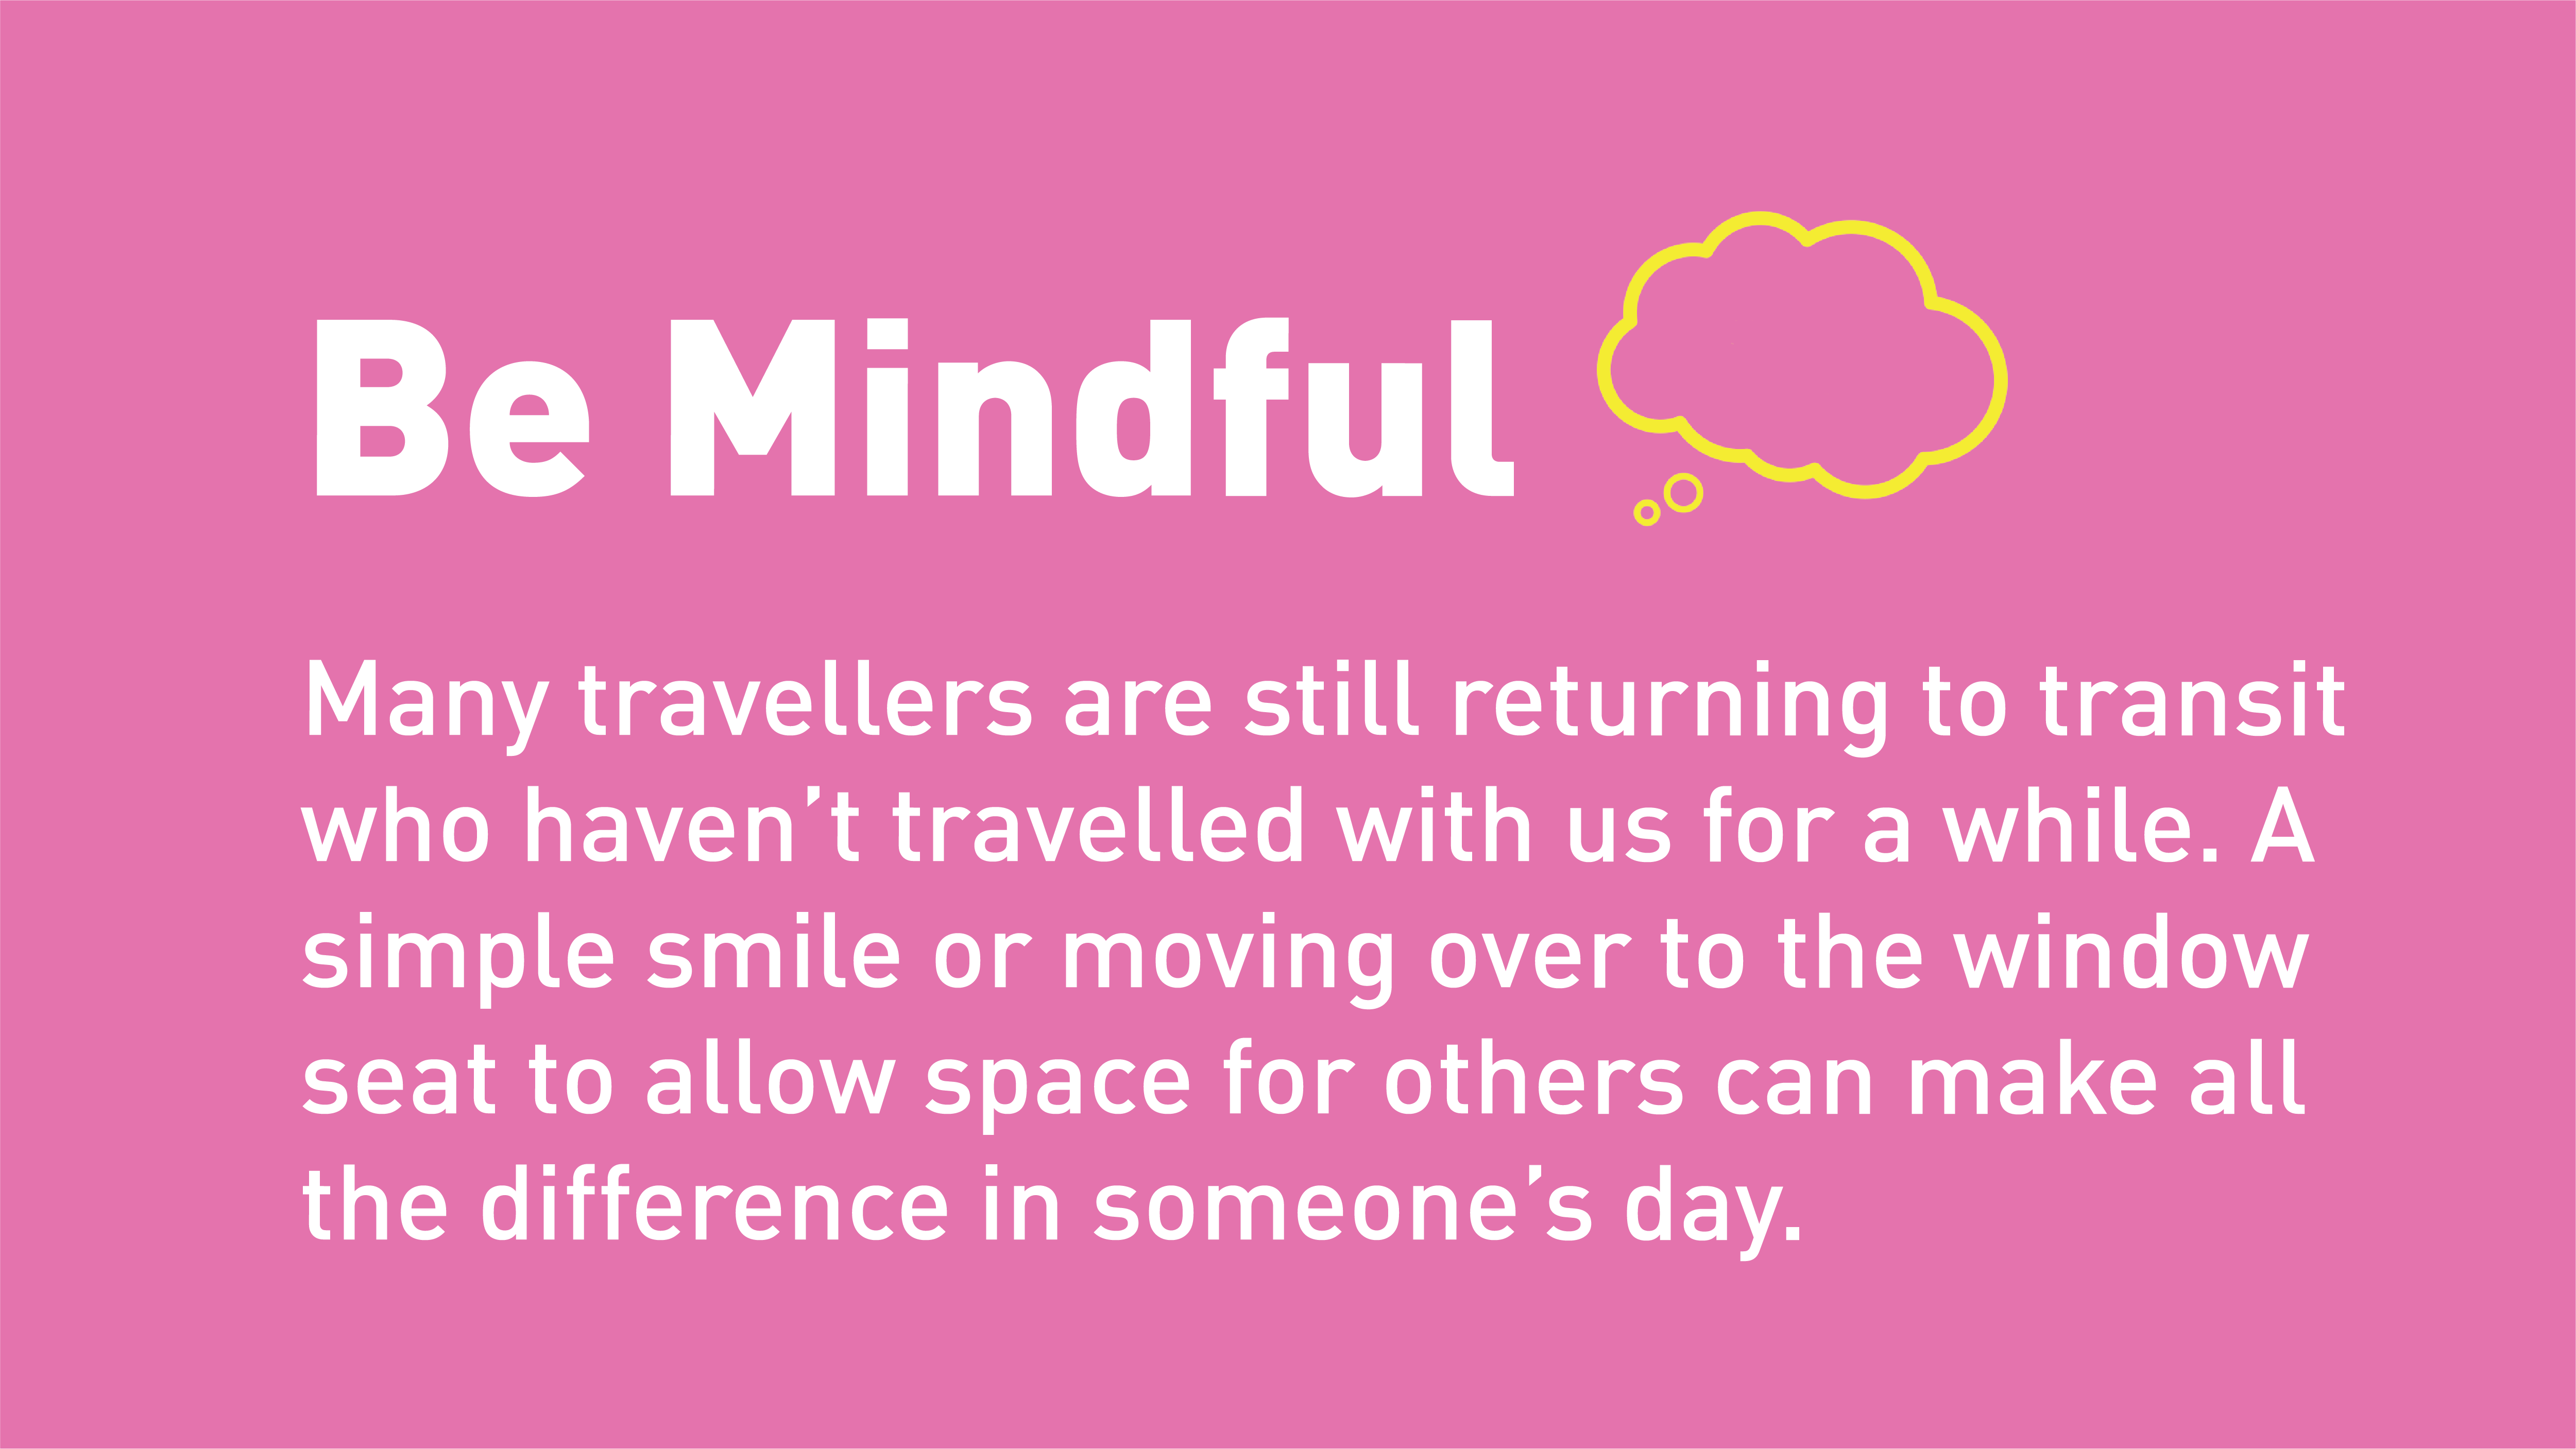 Be Mindful. Many travellers are still returning to transit who haven’t travelled with us for a while.